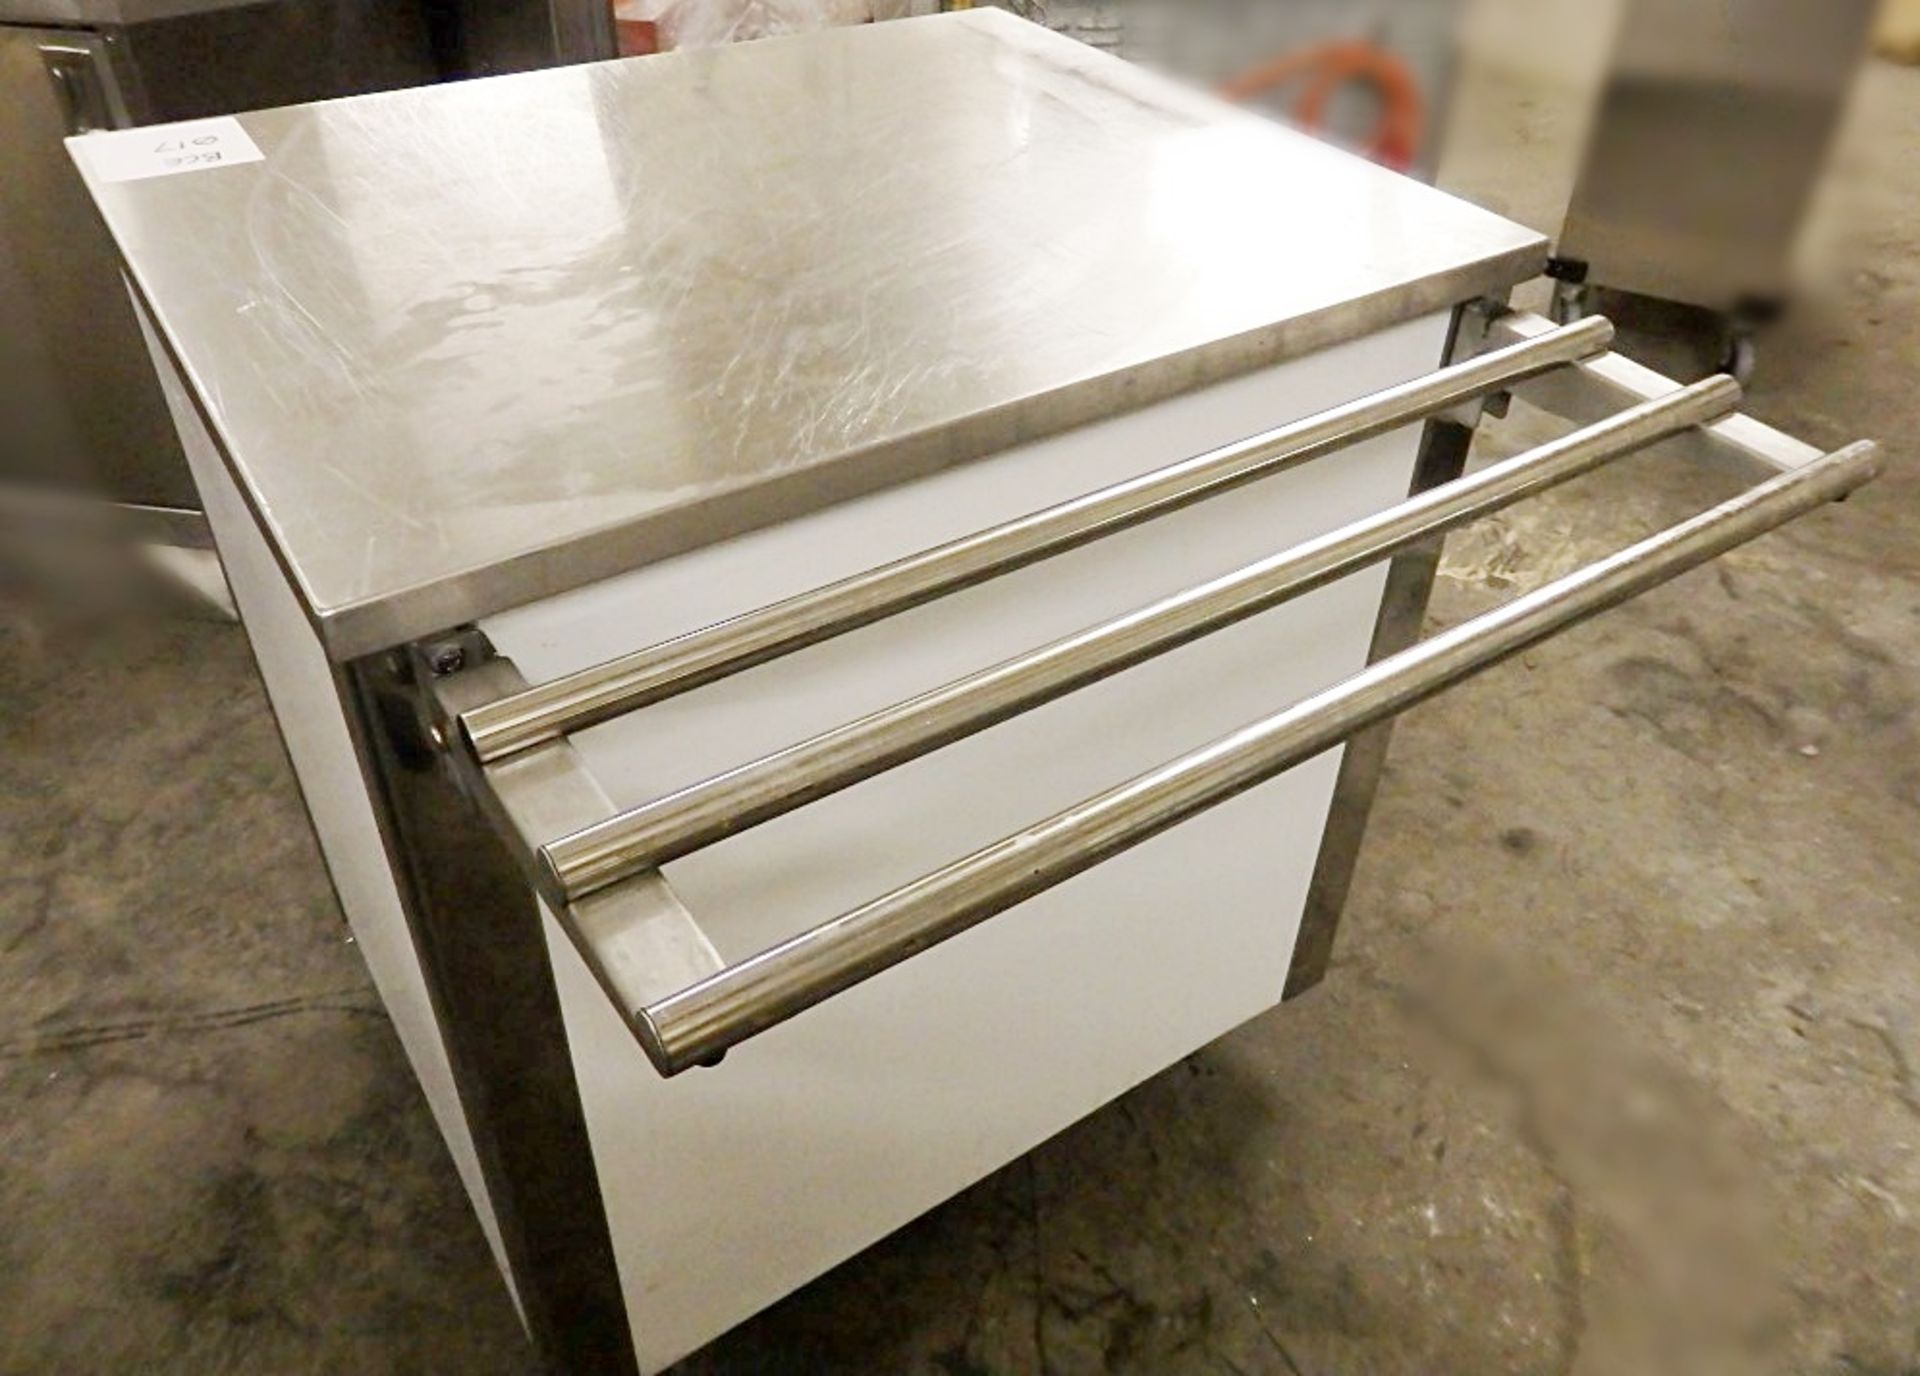 1 x Serving Counter With Storage - On Castors For Maneuverability - Ideal For Pub Carvery, Canteens,